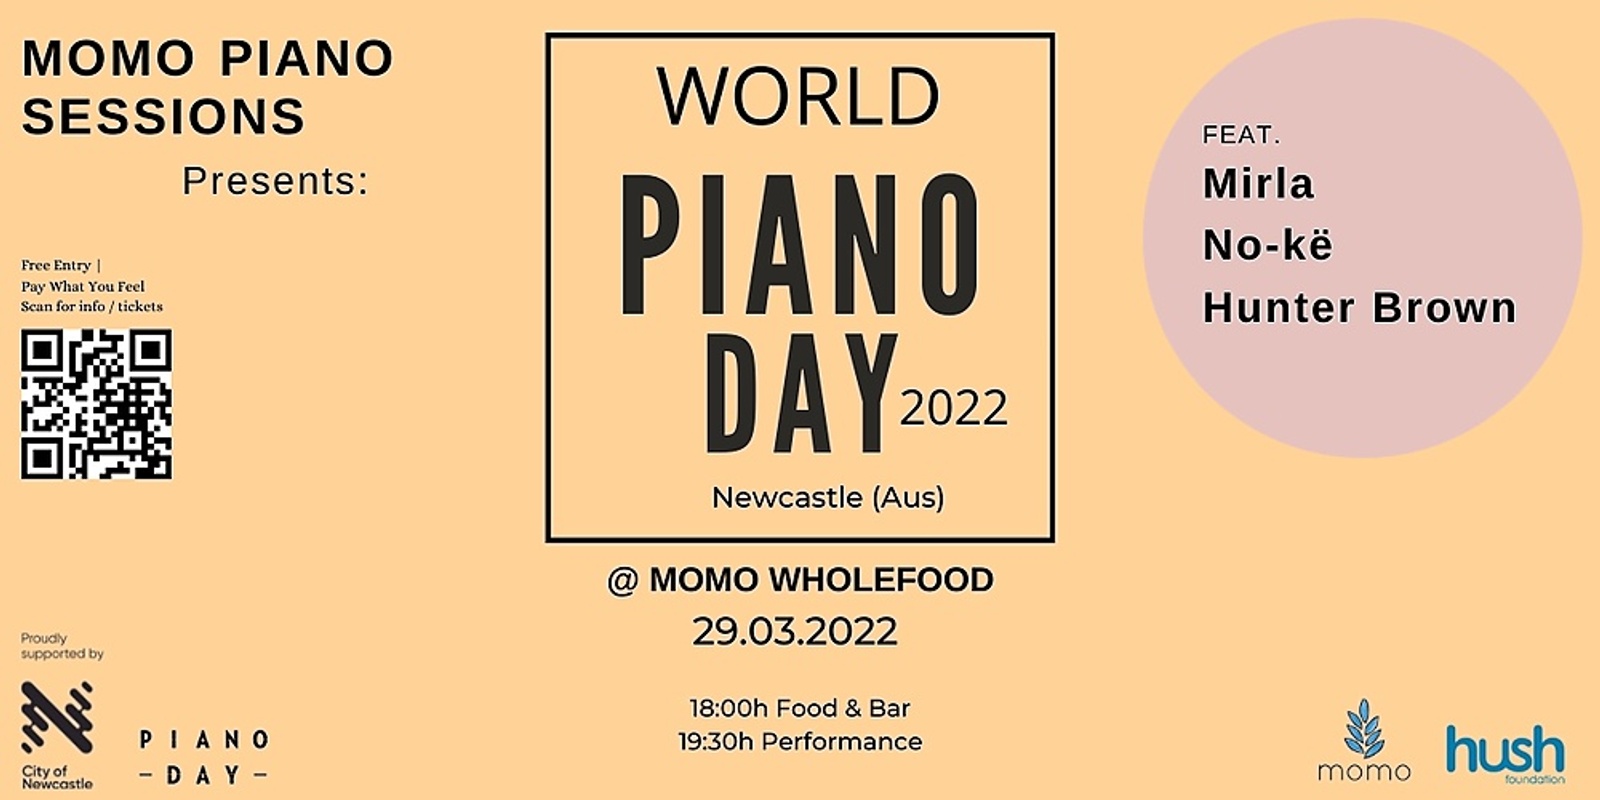 Banner image for Momo Piano Sessions on Piano Day Featuring: Mirla |  No-kë  | Hunter Brown